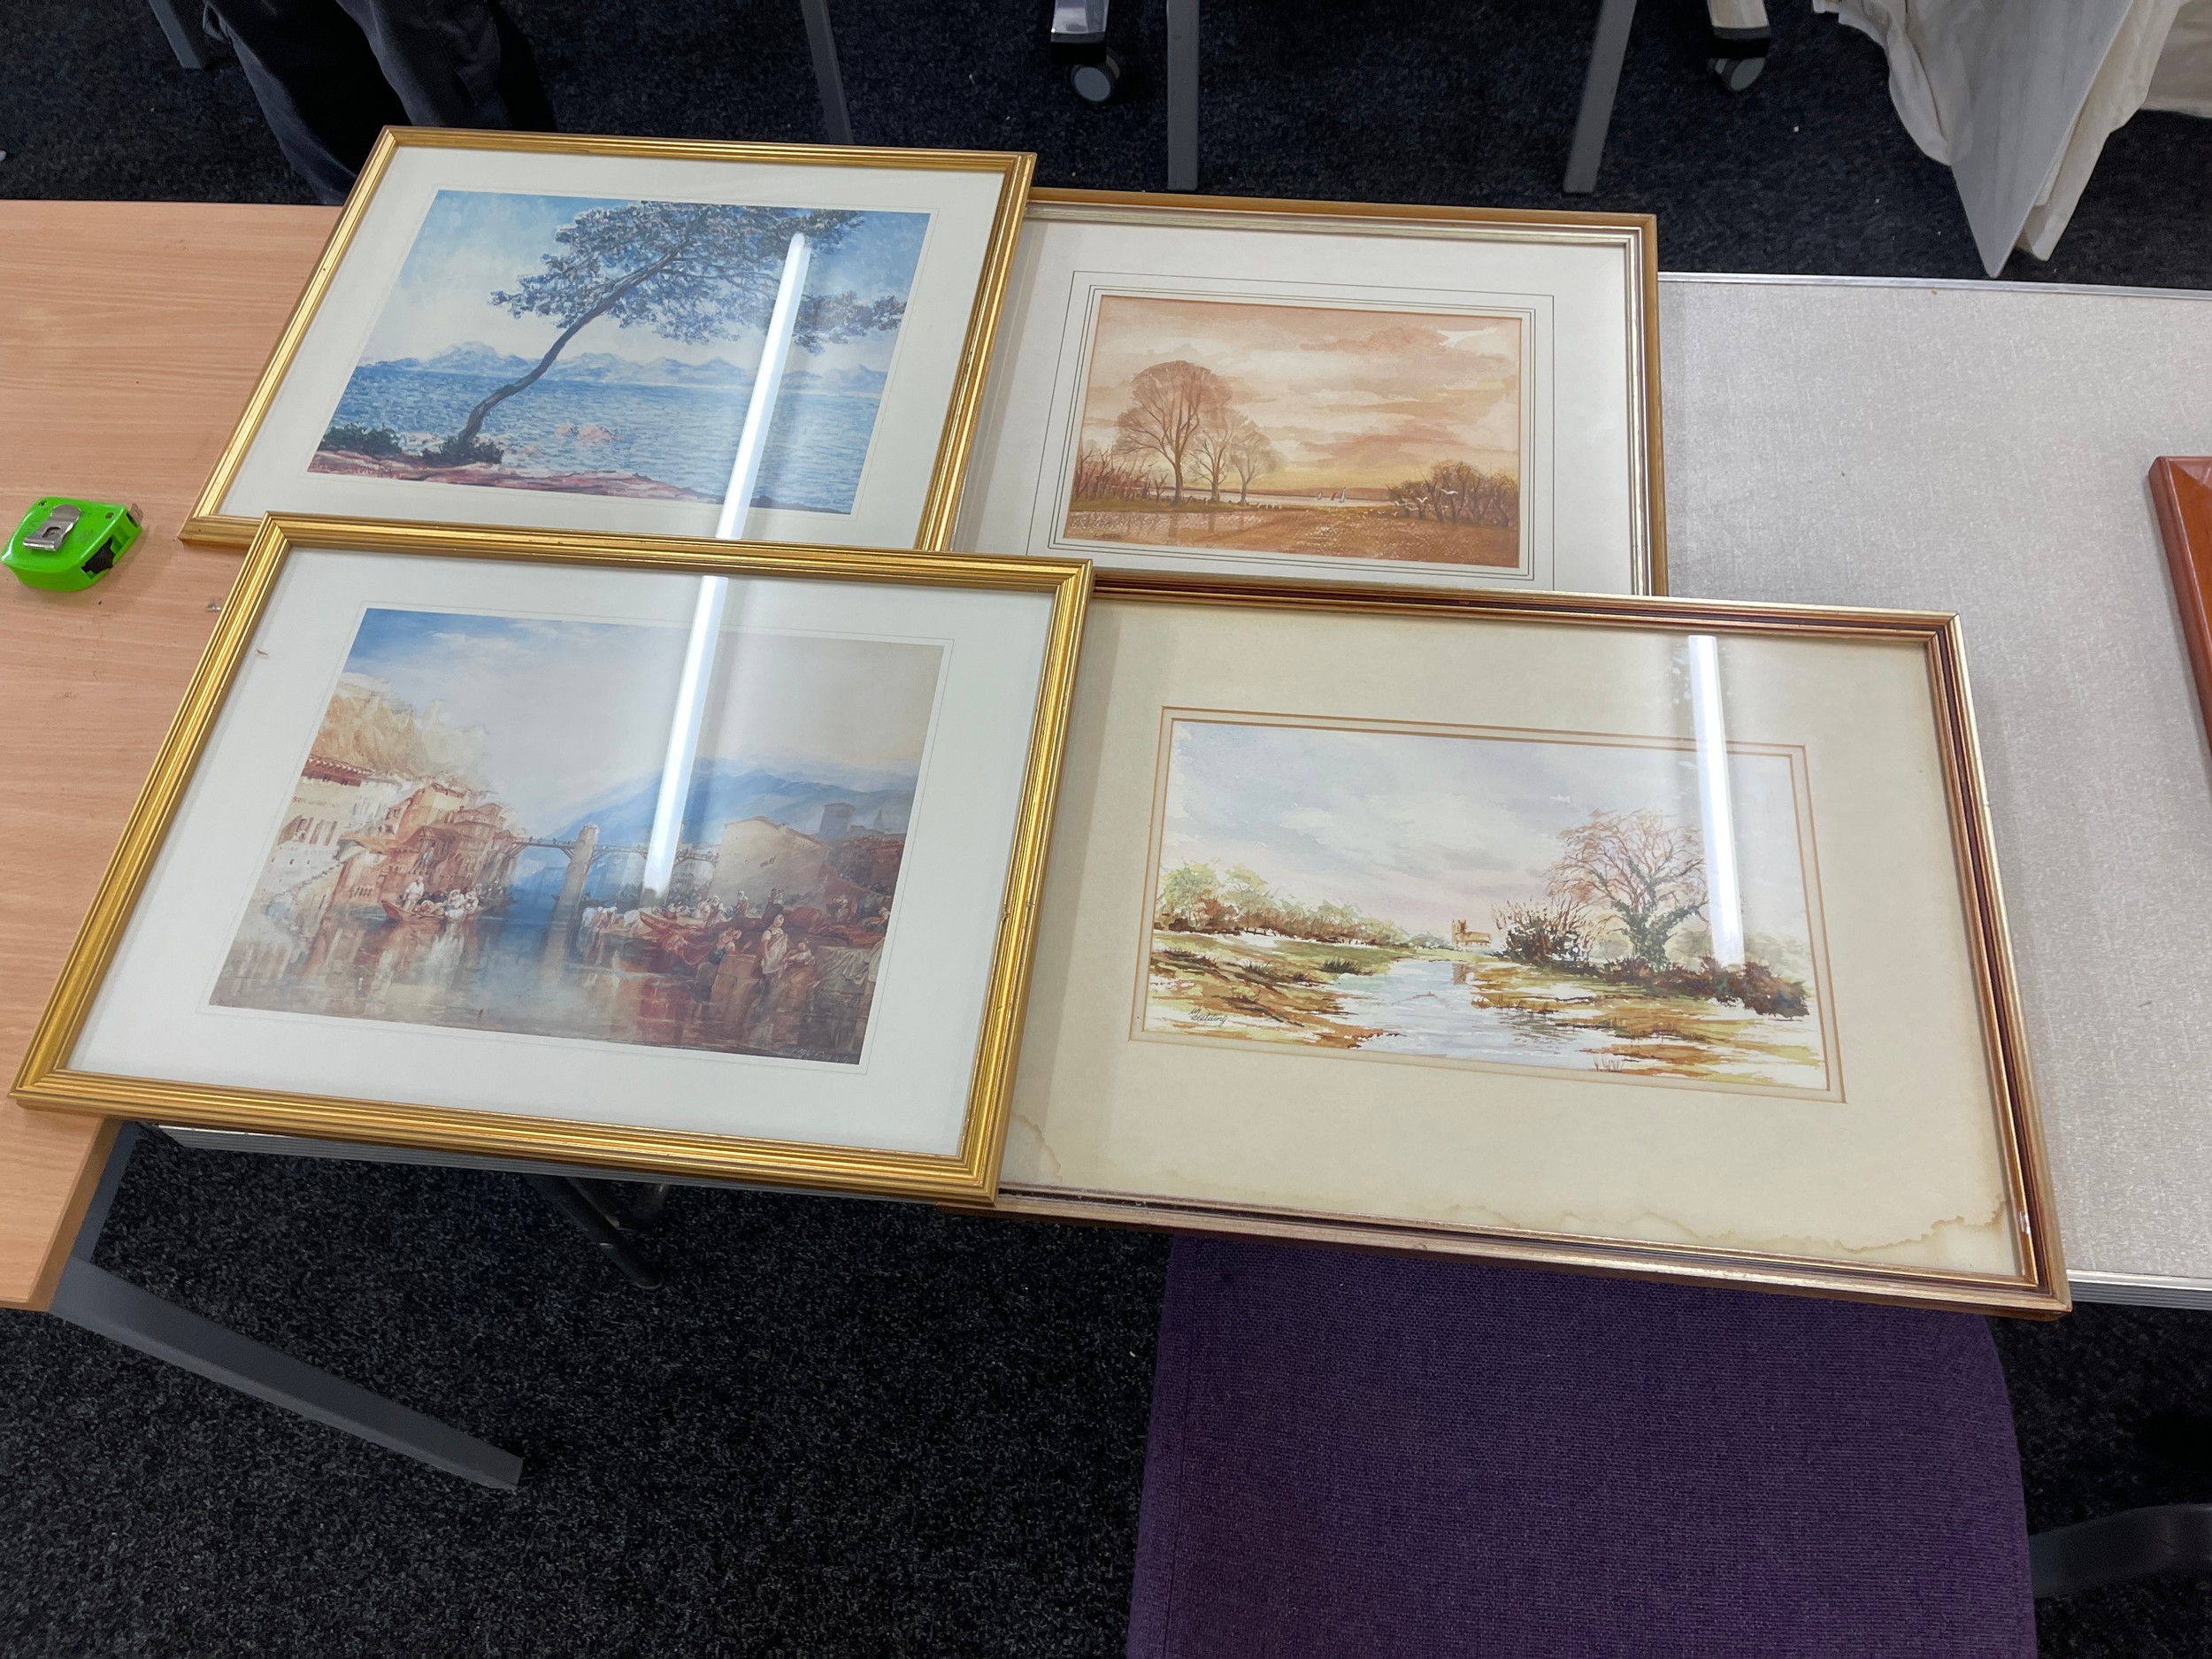 4 Framed Prints largest measures approximately 15 inches tall 21 inches wide